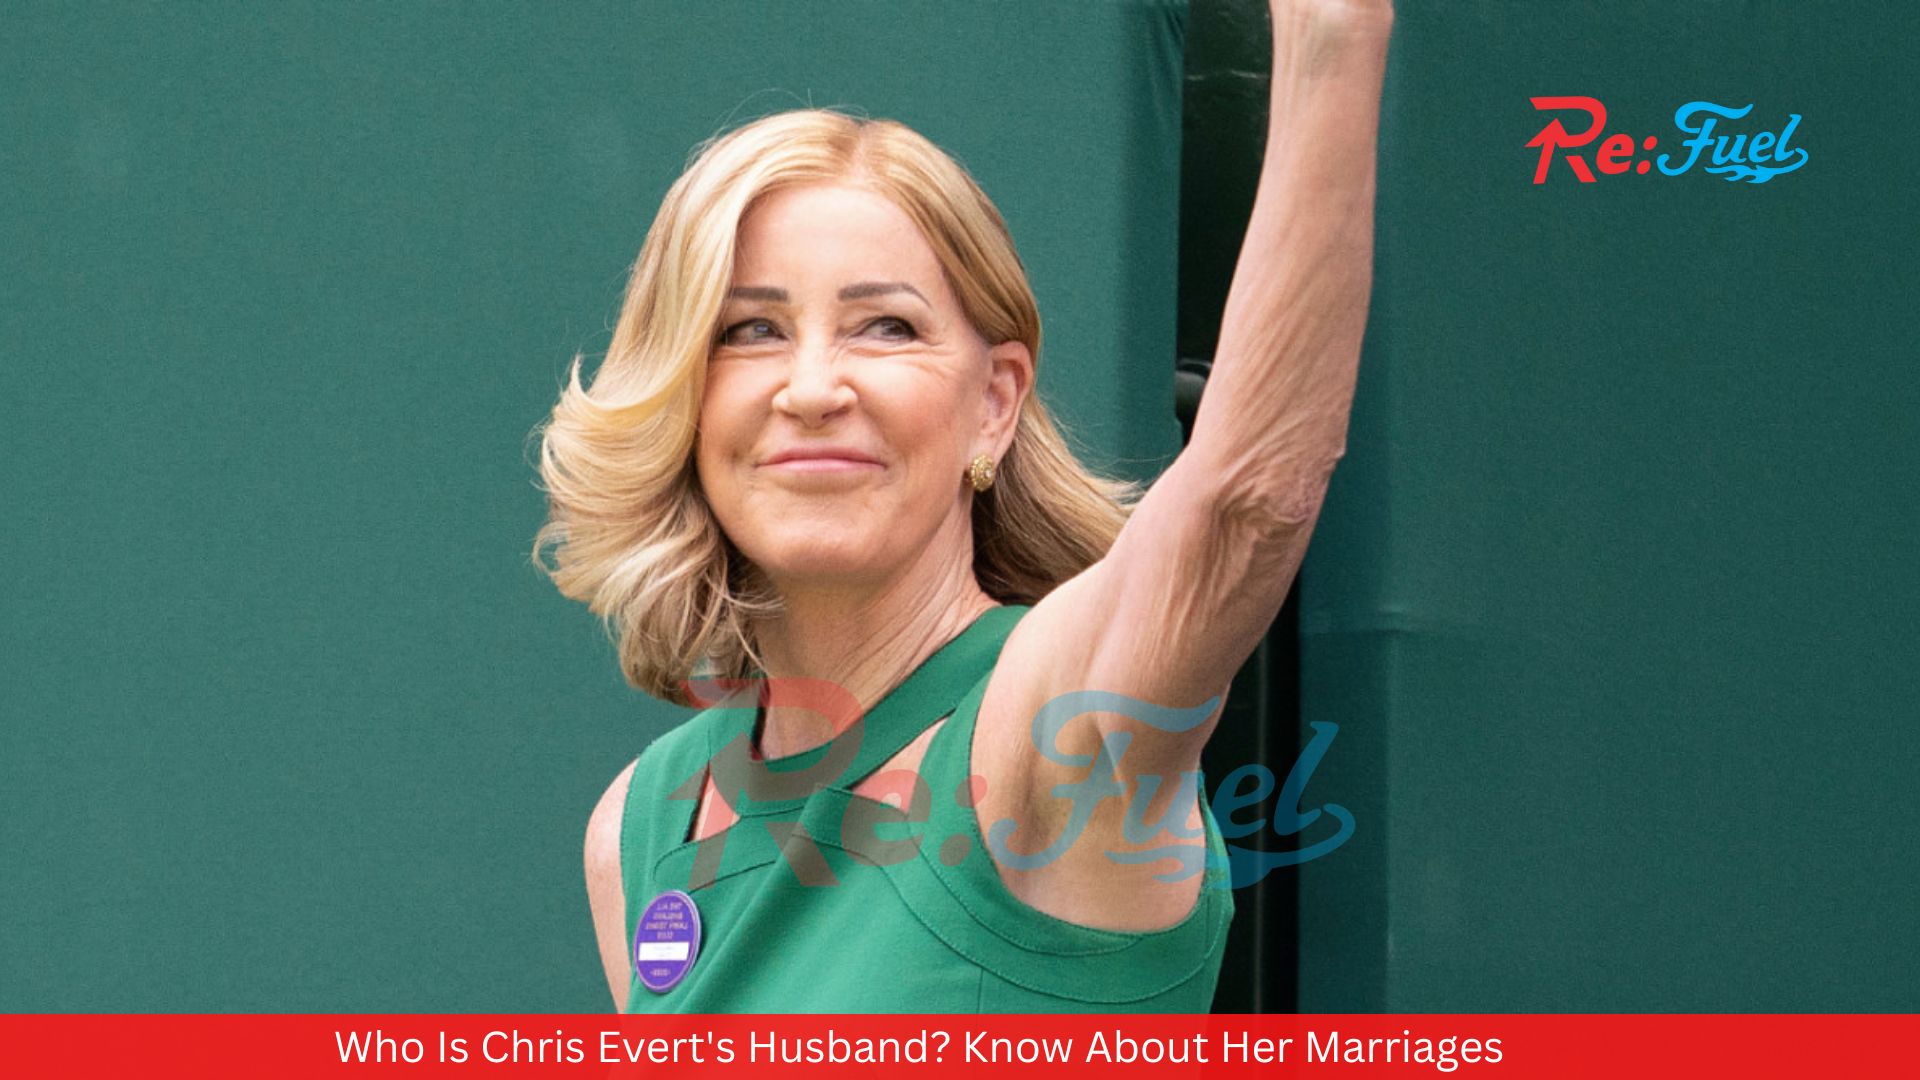 Who Is Chris Evert's Husband? Know About Her Marriages